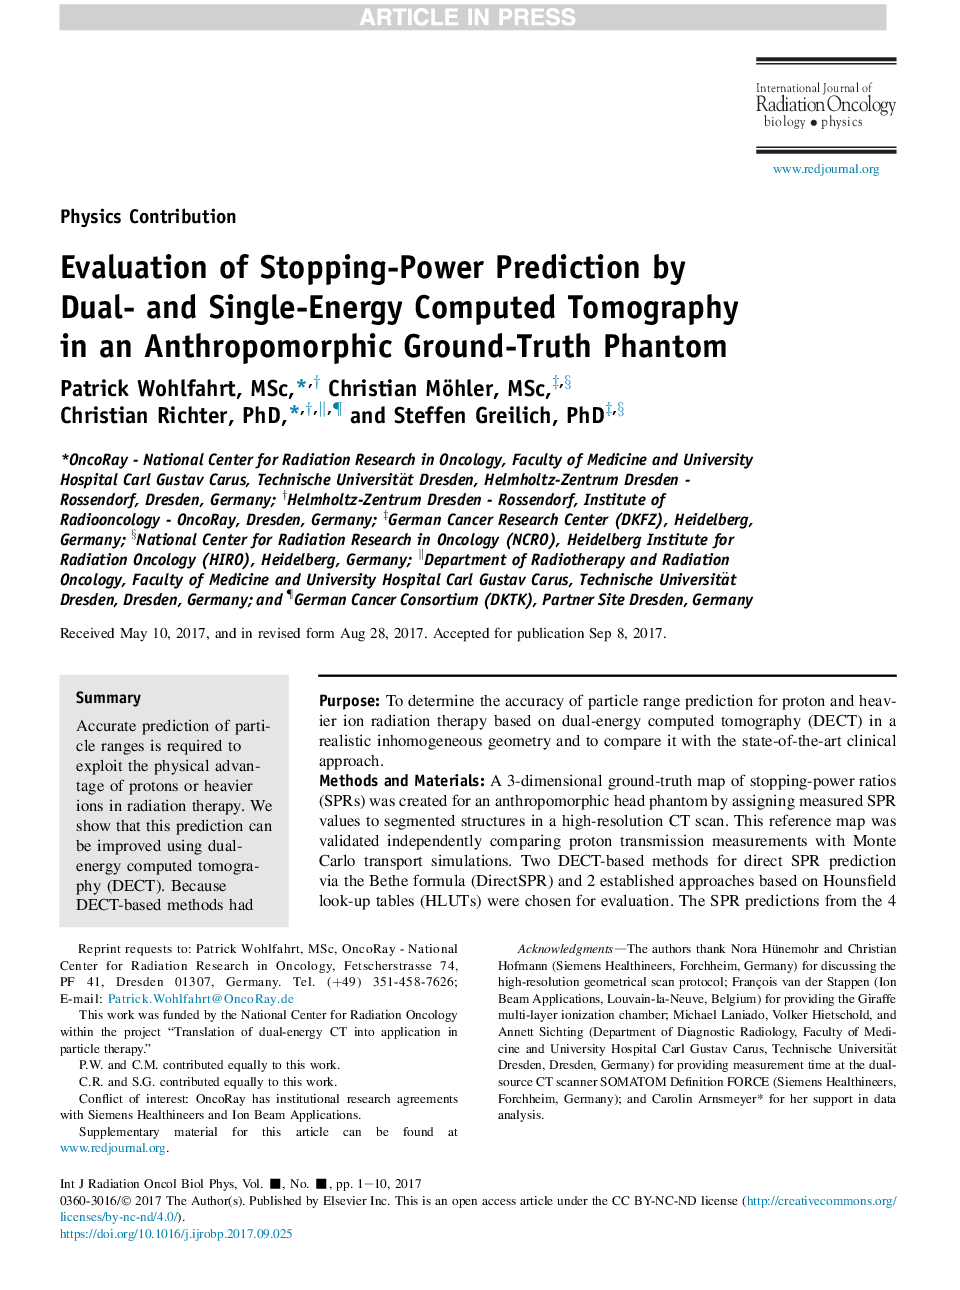 Evaluation of Stopping-Power Prediction by Dual- and Single-Energy Computed Tomography in an Anthropomorphic Ground-Truth Phantom